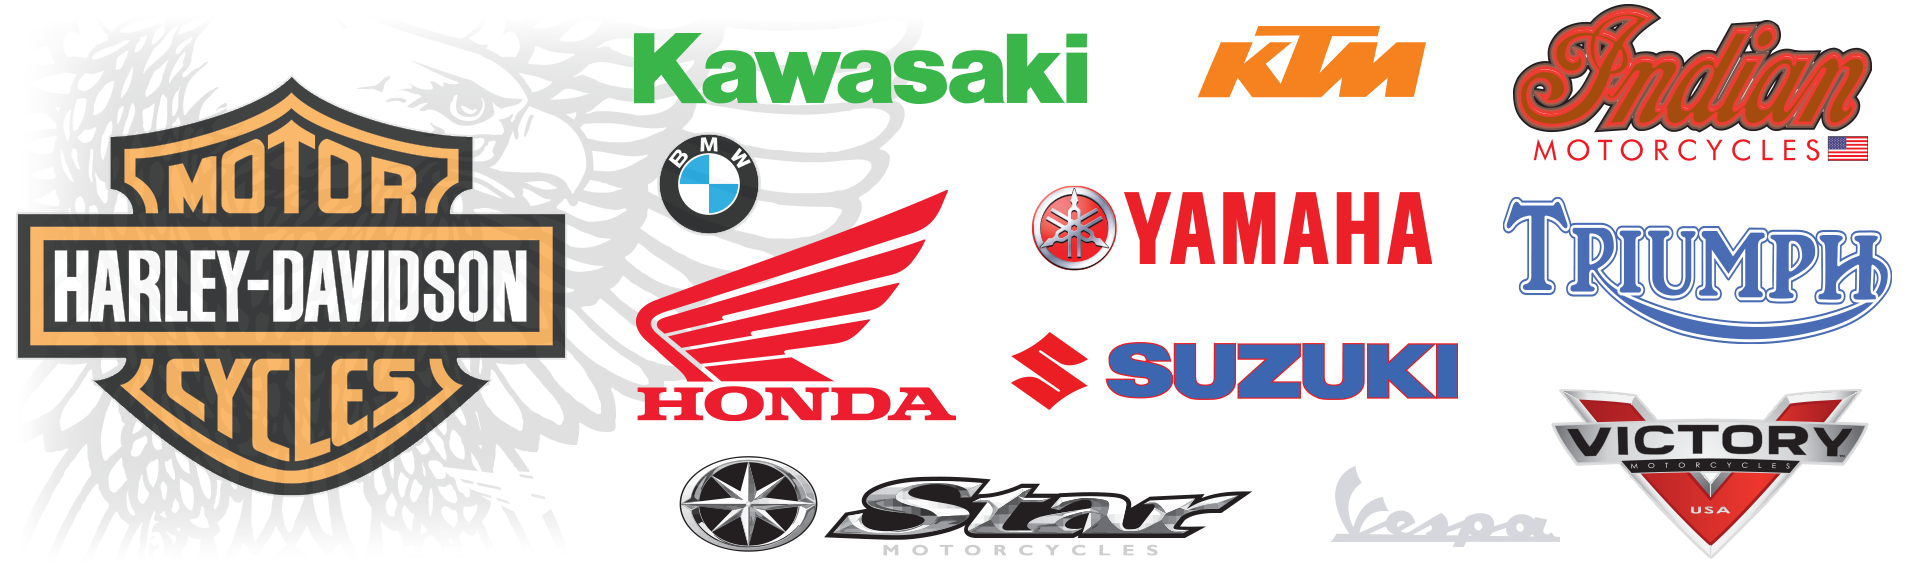 We are happy to see any motorcycle brand roll in our door at North County Hyper Sports.